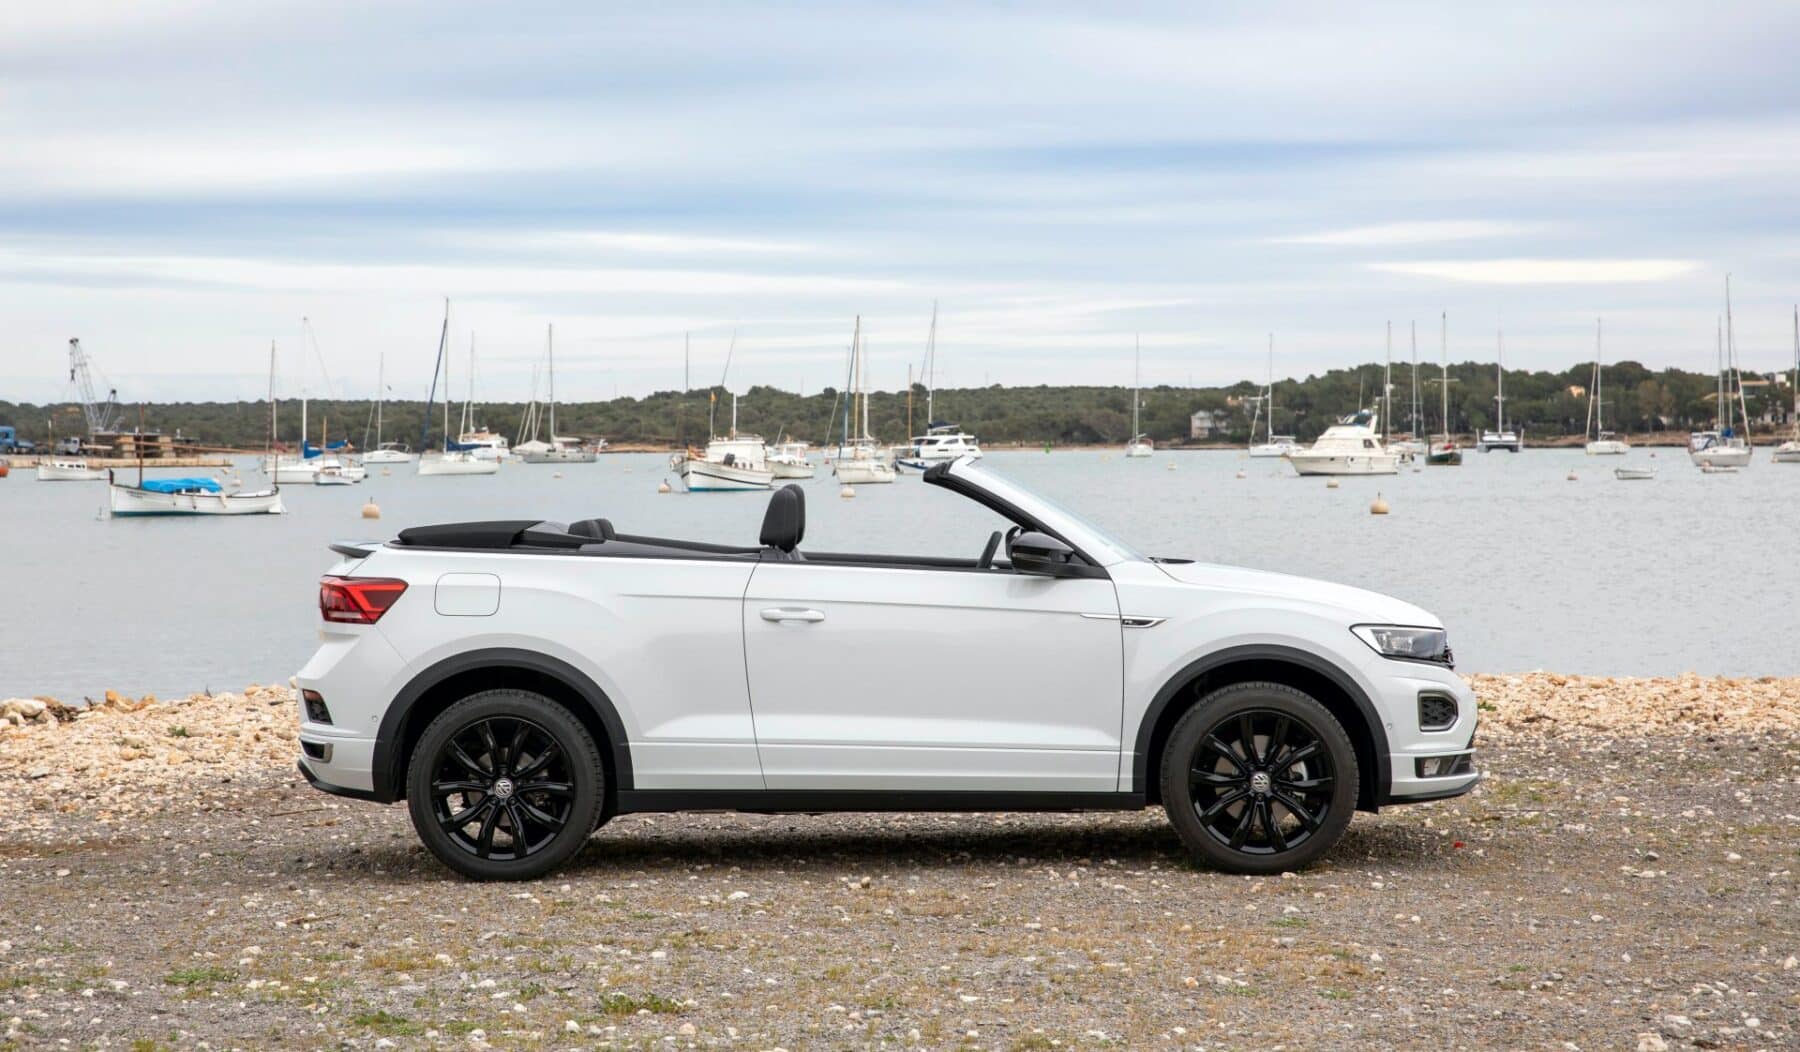 Which Volkswagen T-Roc is the public's favorite? Here the data by engines